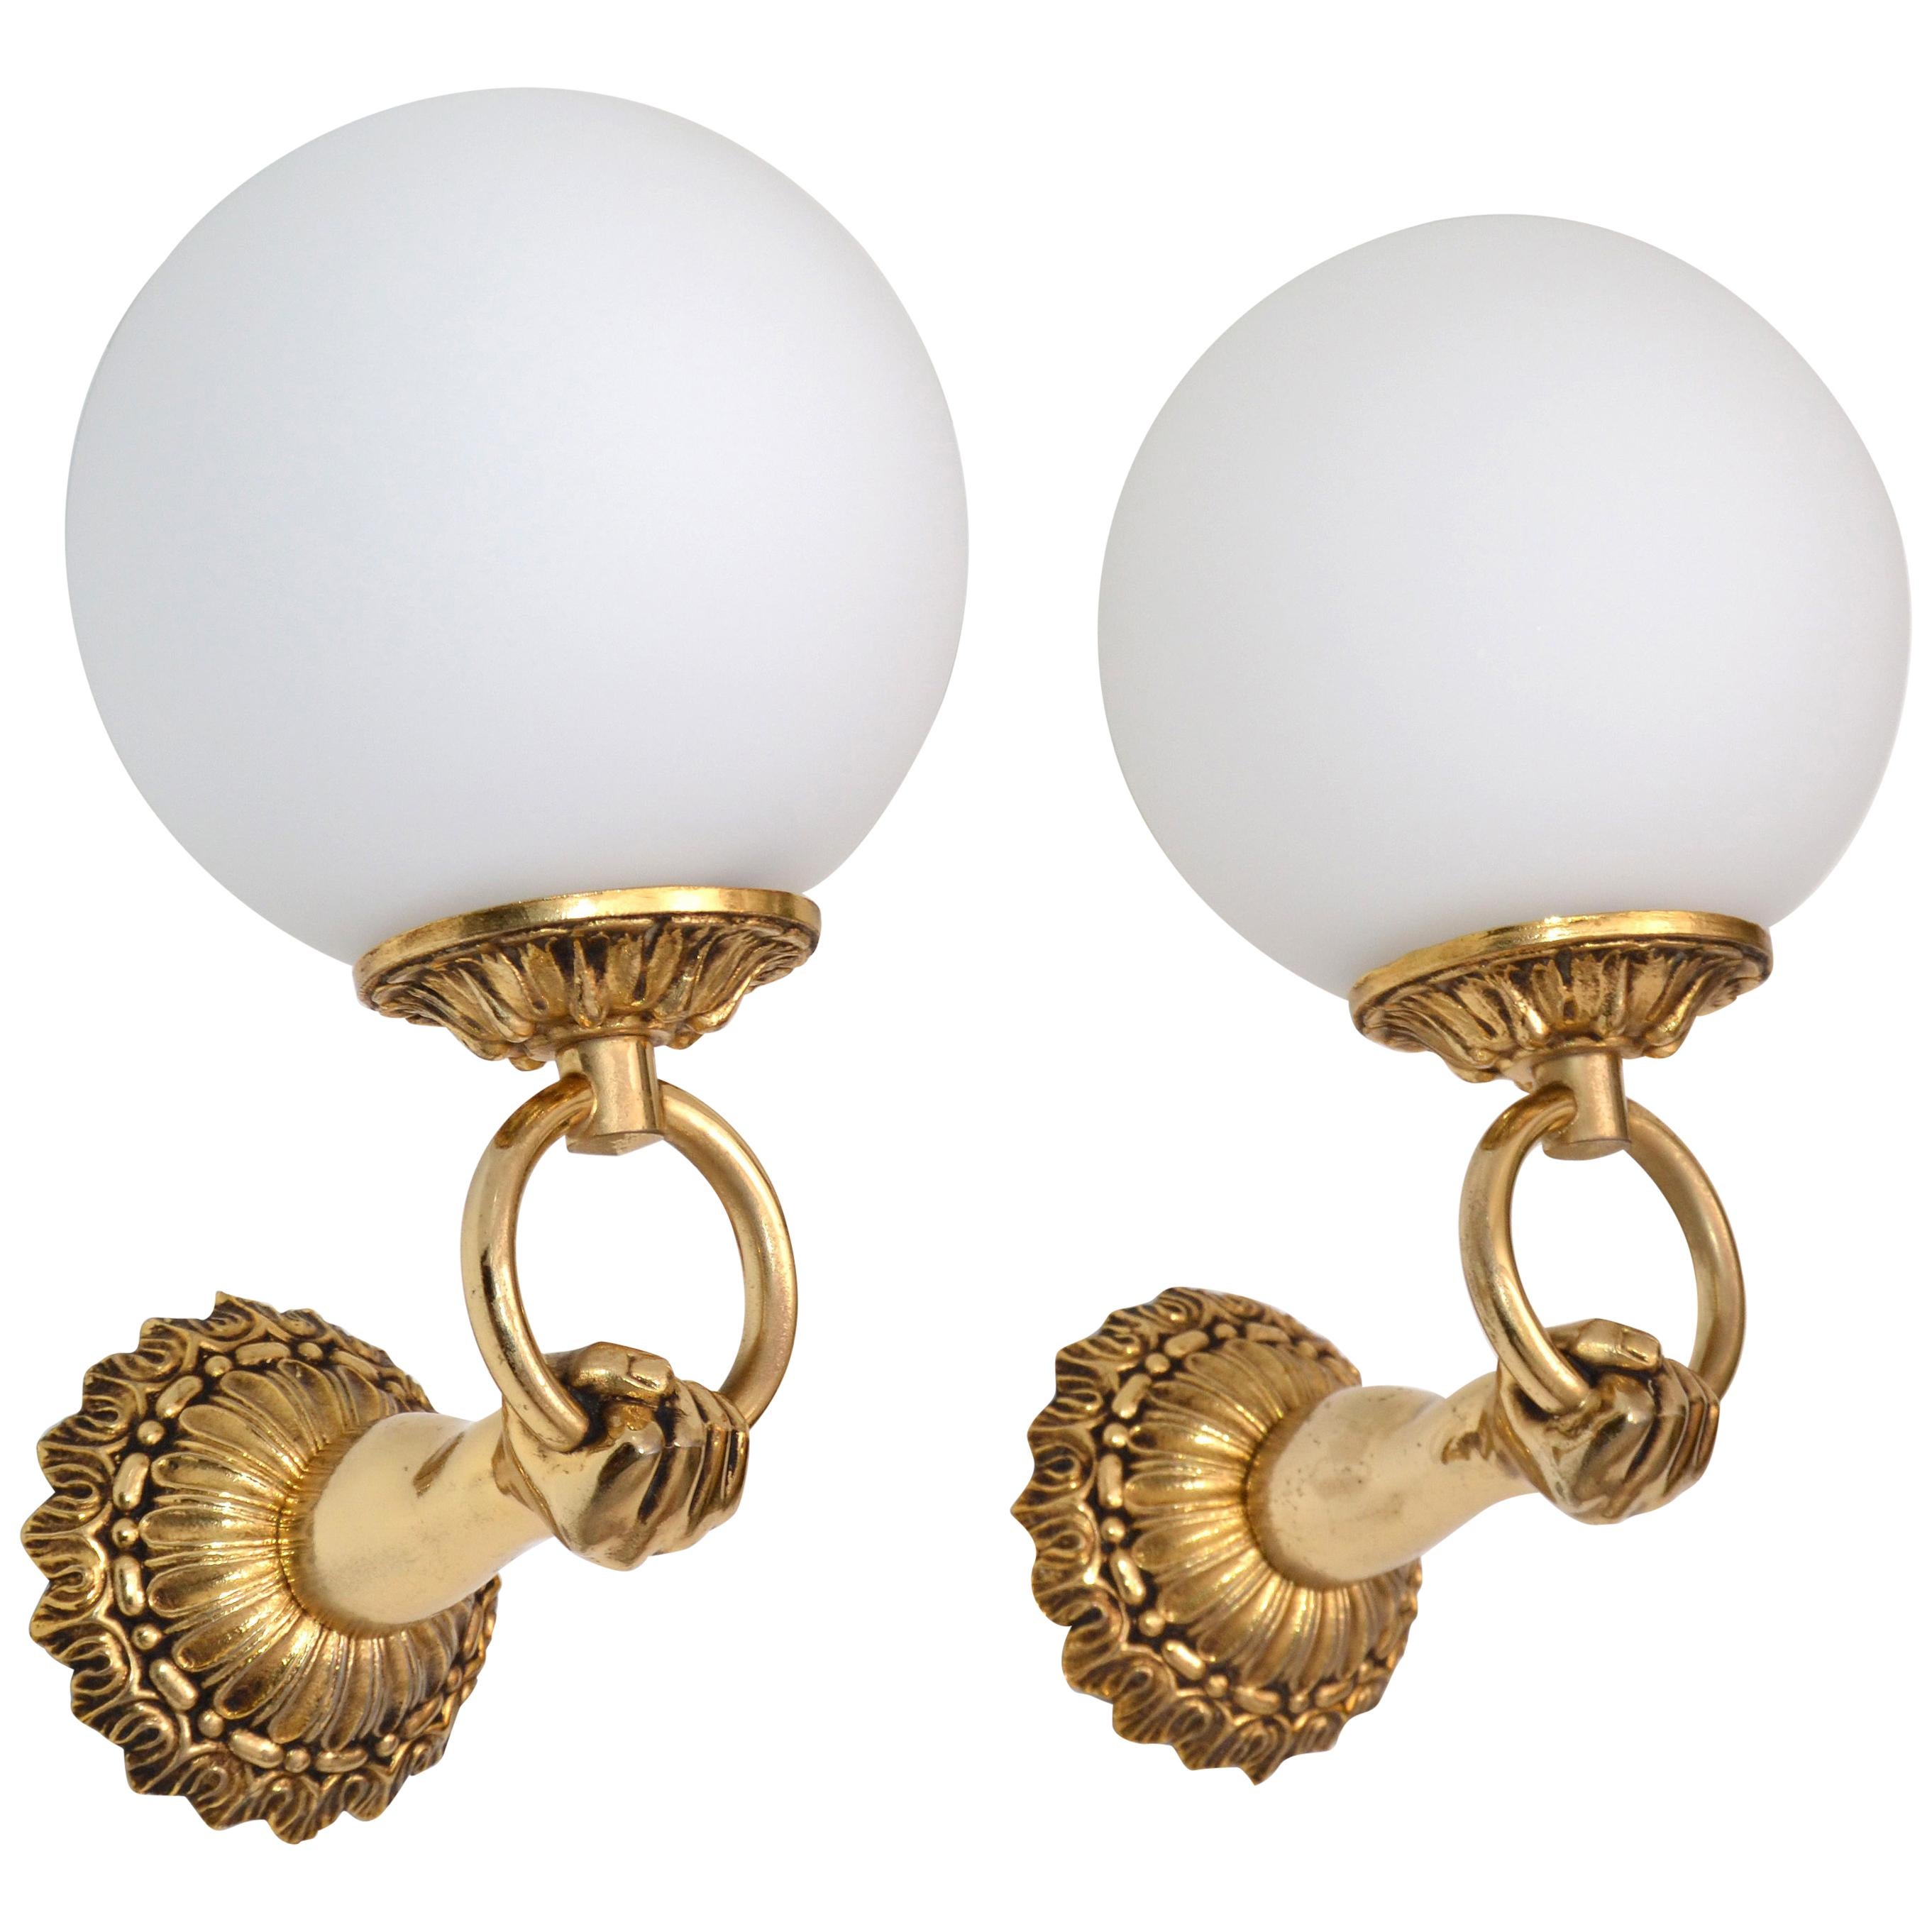 1960s French Neoclassical Hand Brass and Opaline Glass Sconces, 3 Pair Available